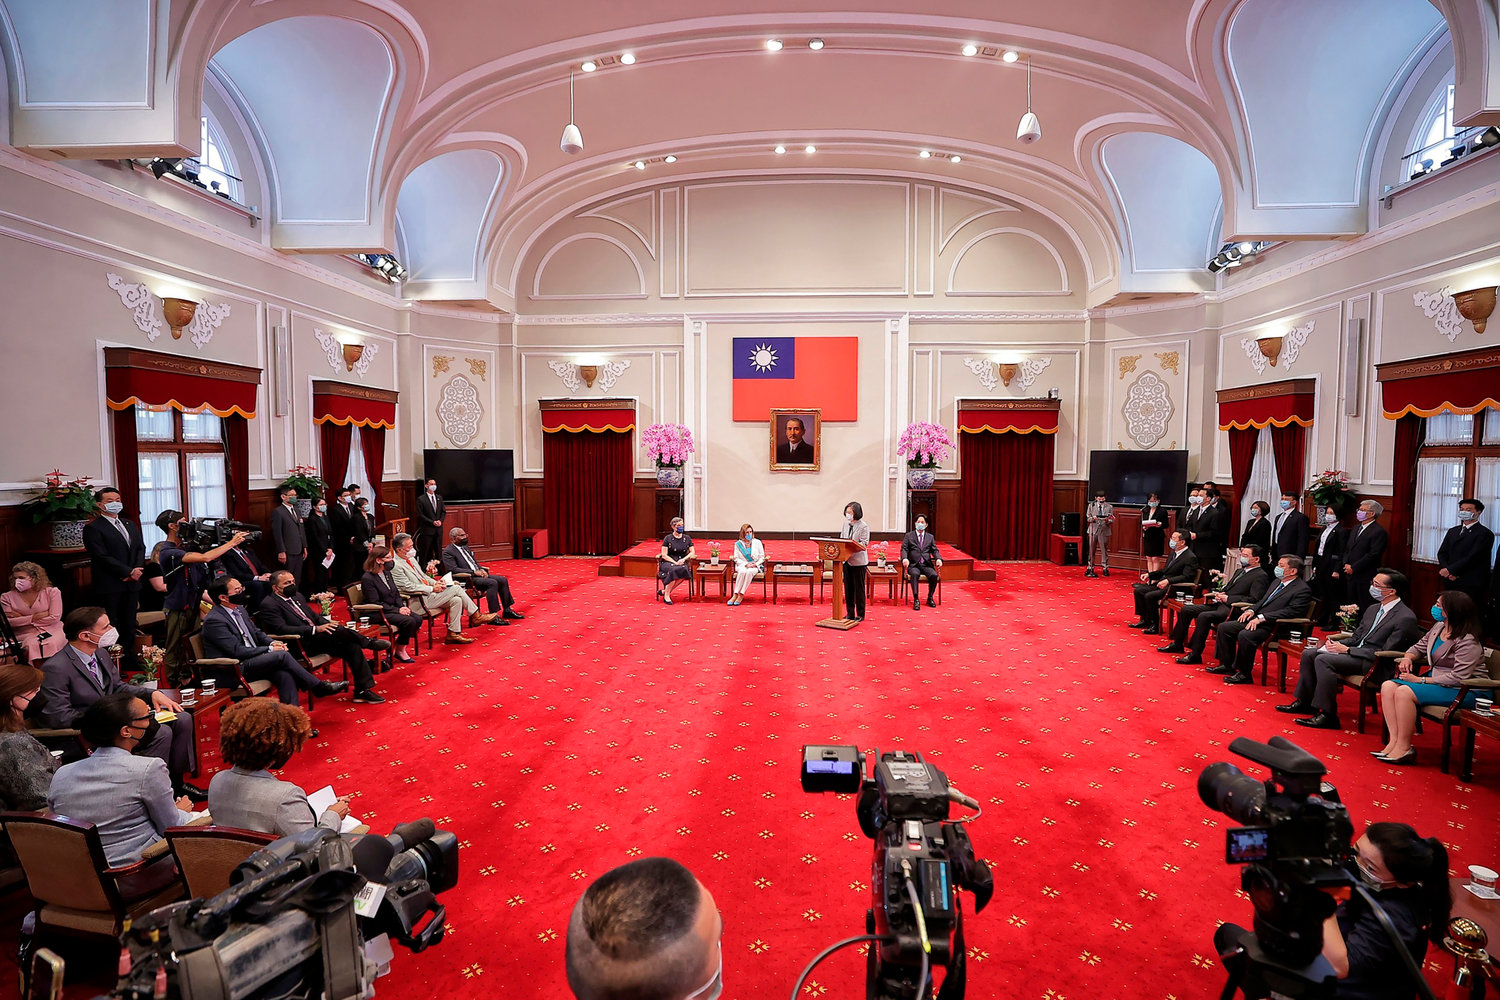 In this photo released by the Taiwan Presidential Office, Taiwanese President President Tsai Ing-wen, standing, speaks during a meeting with U.S. House Speaker Nancy Pelosi and other members of Congress in Taipei, Taiwan, Wednesday, Aug. 3, 2022. U.S. House Speaker Nancy Pelosi, meeting top officials in Taiwan despite warnings from China, said Wednesday that she and other congressional leaders in a visiting delegation are showing they will not abandon their commitment to the self-governing island. (Taiwan Presidential Office via AP)